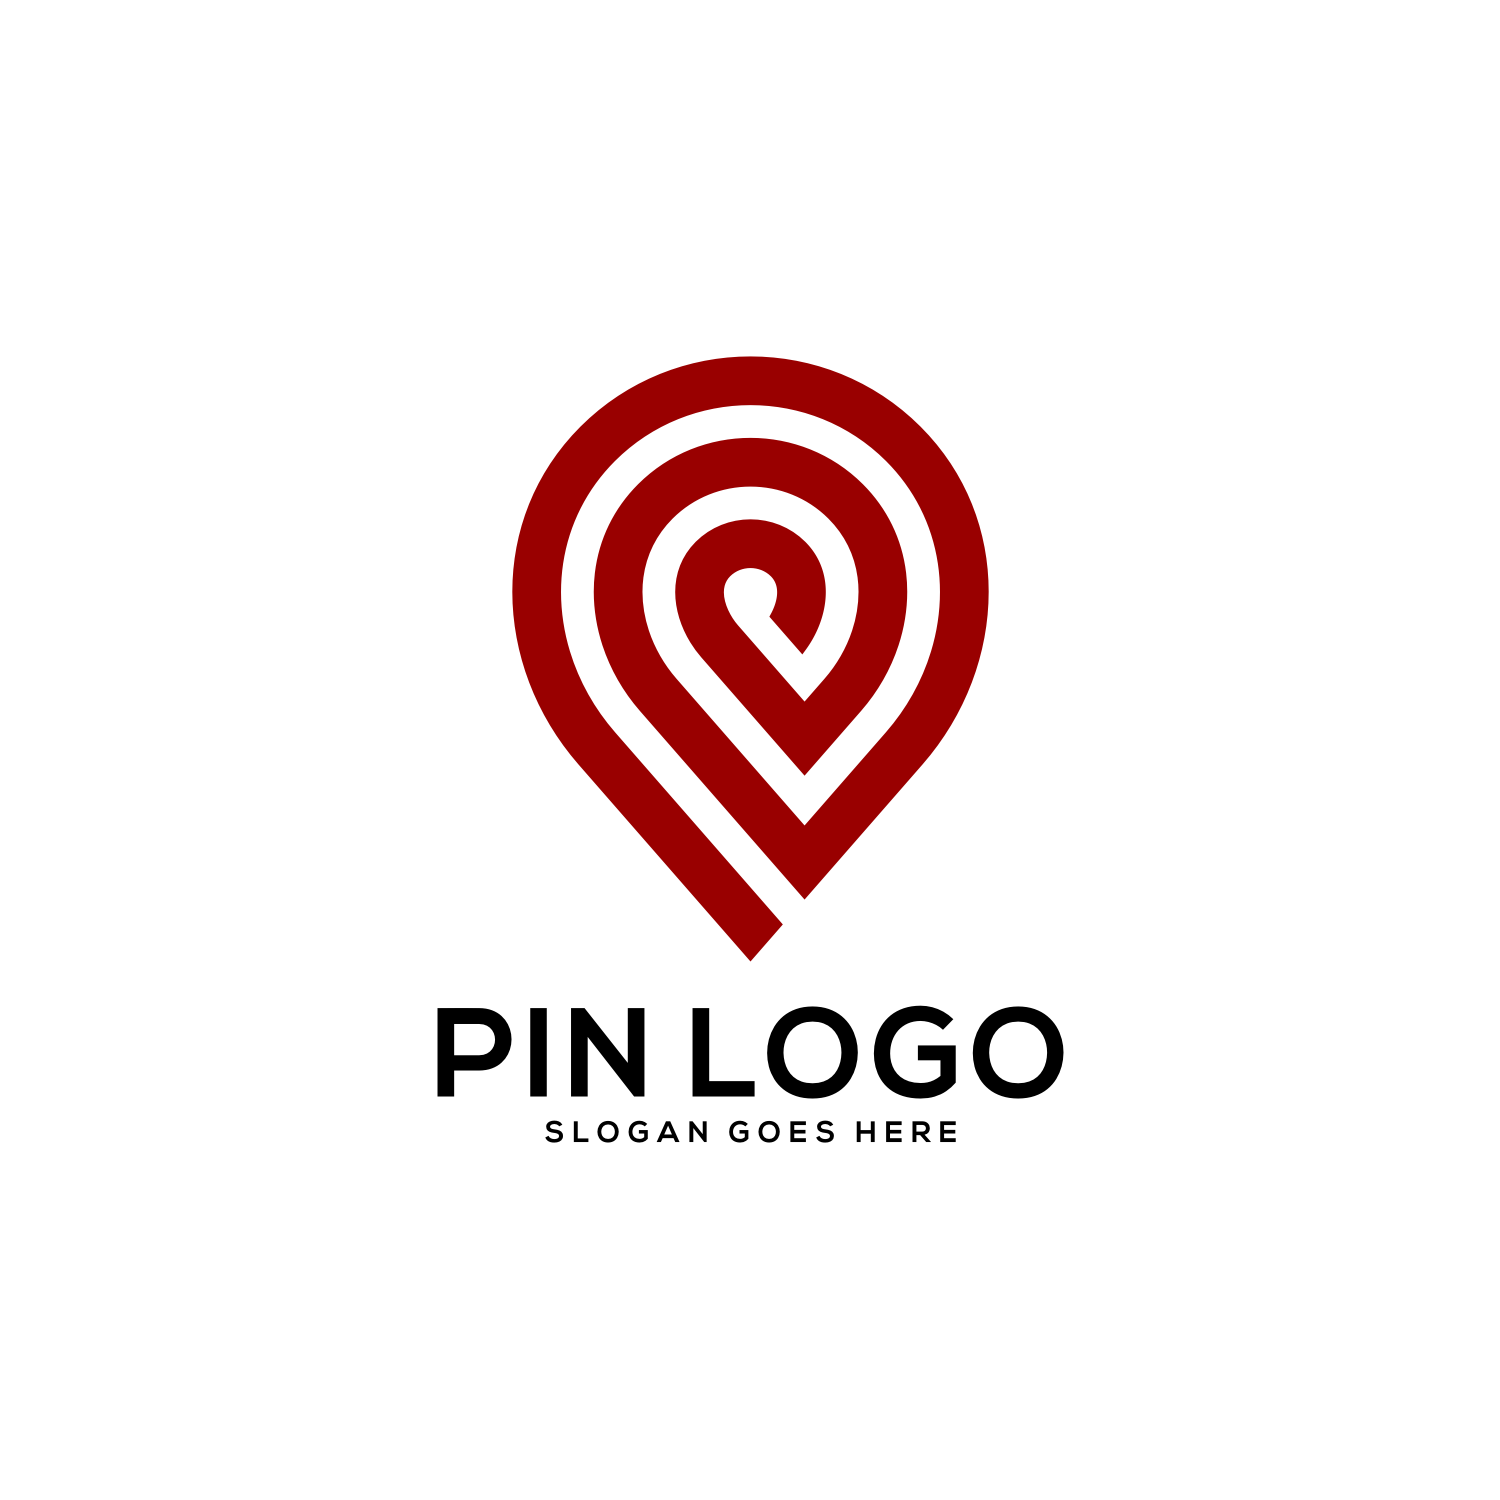 Pin Location Outline Logo Vector Design cover image.